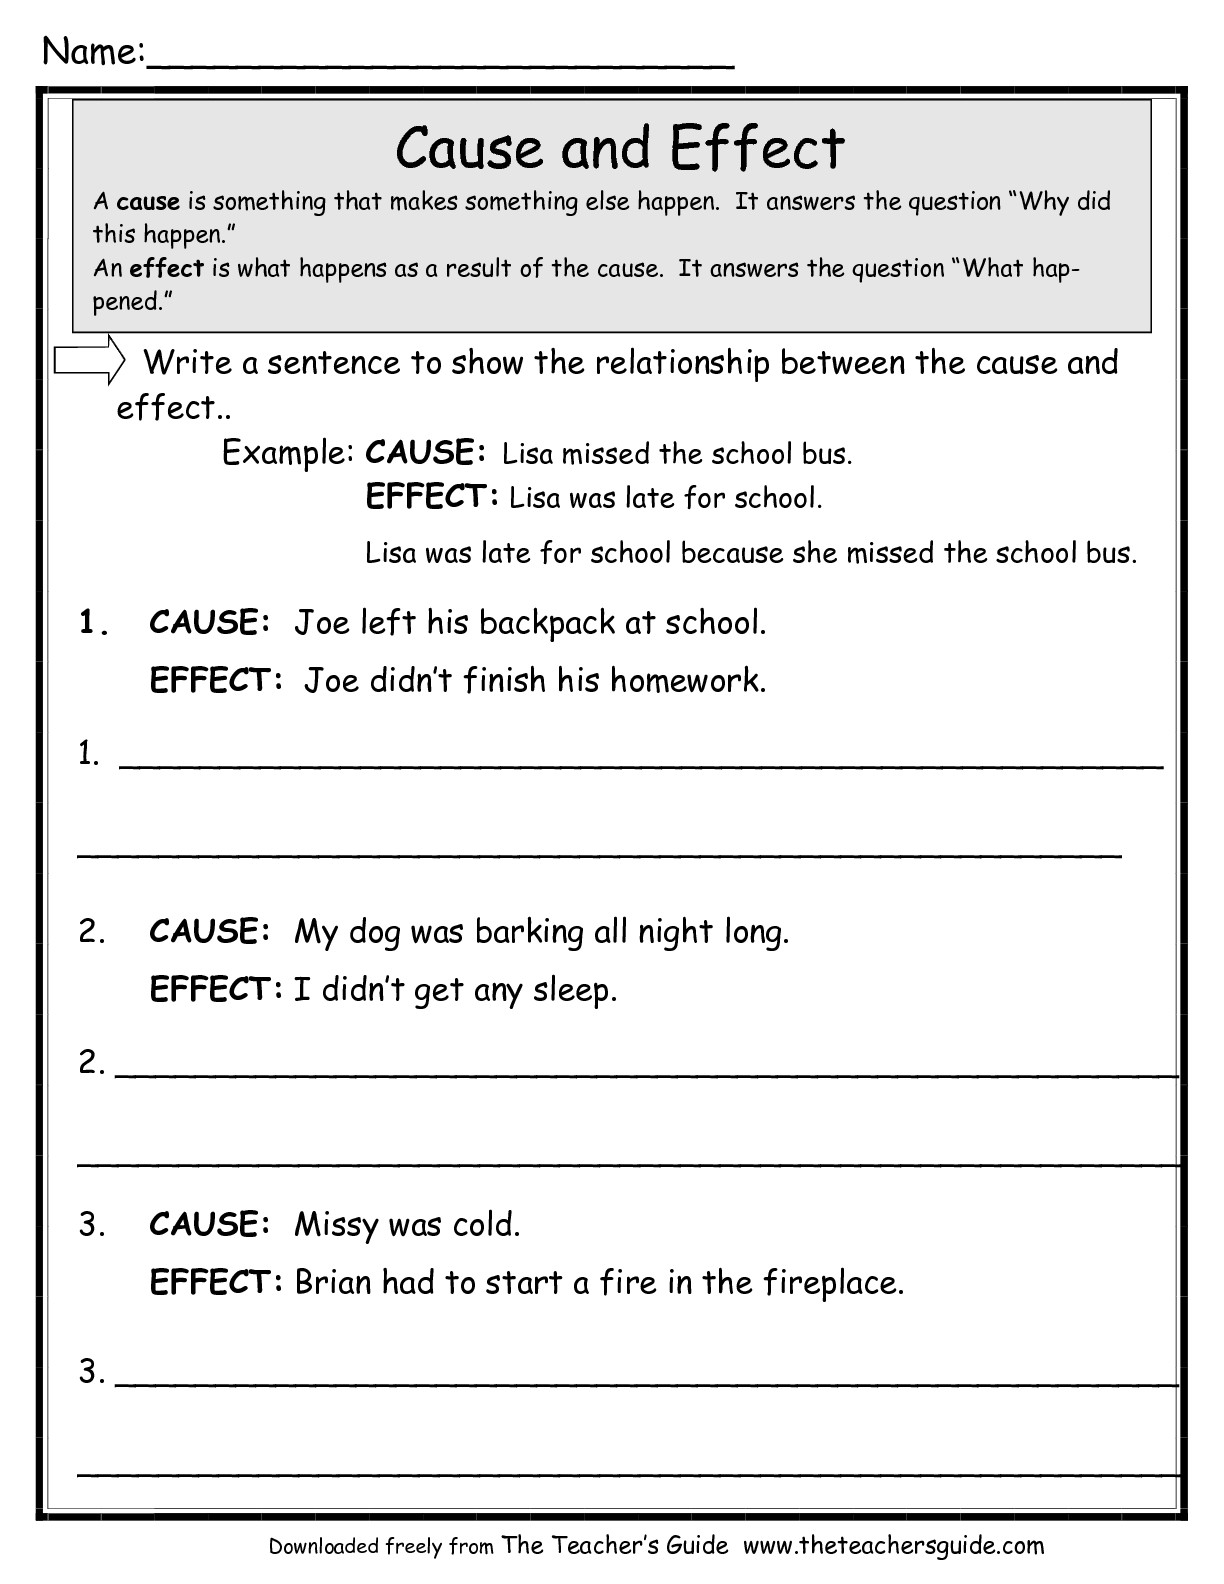 16-best-images-of-interactive-reading-worksheets-free-cause-and